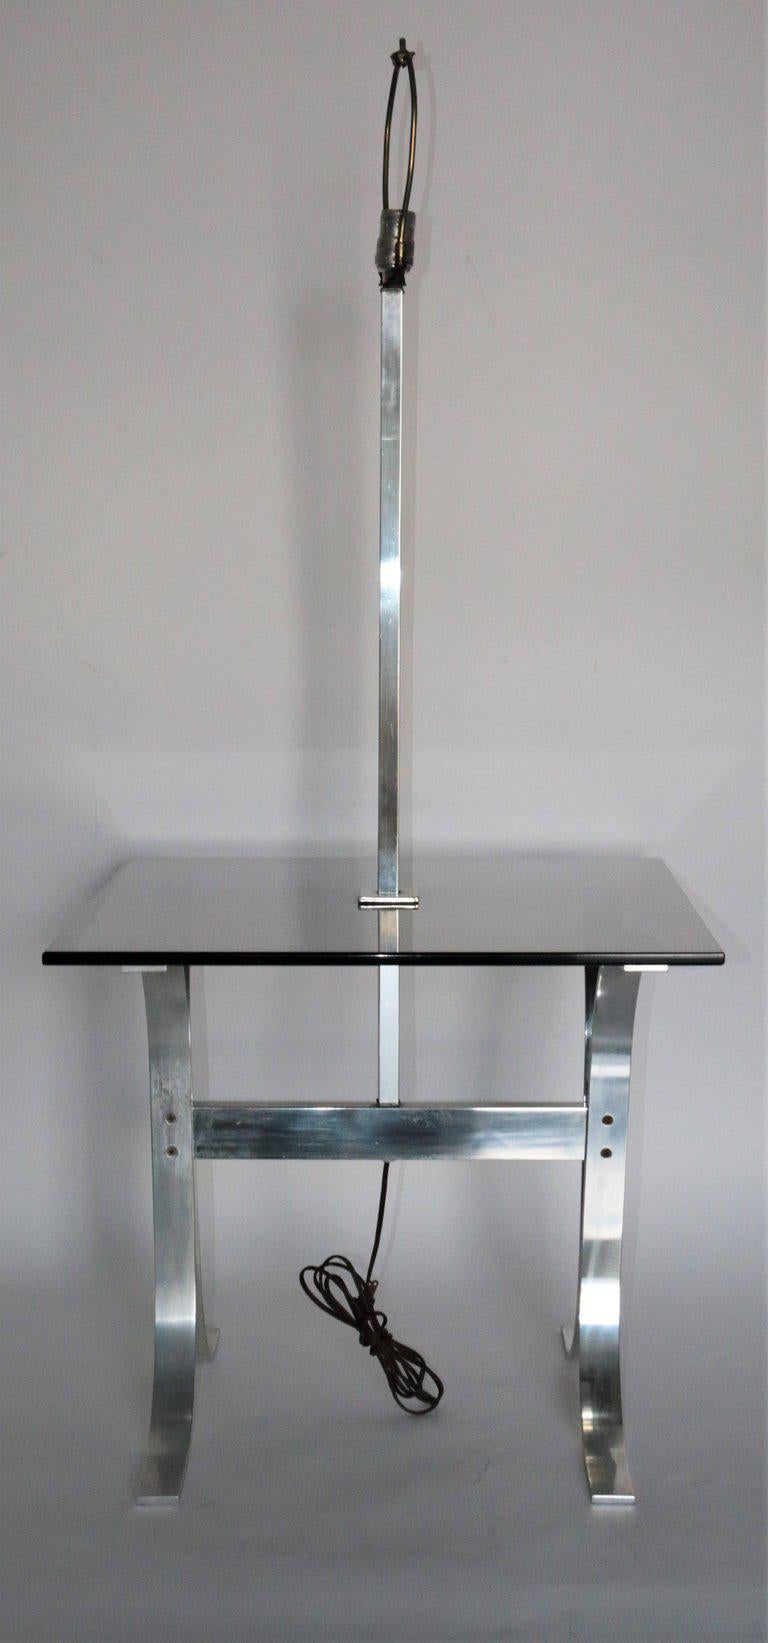 Description
Mid-Century Modern side table with a built in lamp and tinted glass. Made of chrome.
IN THE STYLE OF
Mid-Century Modern
PLACE OF ORIGIN
Denmark
DATE OF MANUFACTURE
1950
PERIOD
Mid-20th century
MATERIALS AND